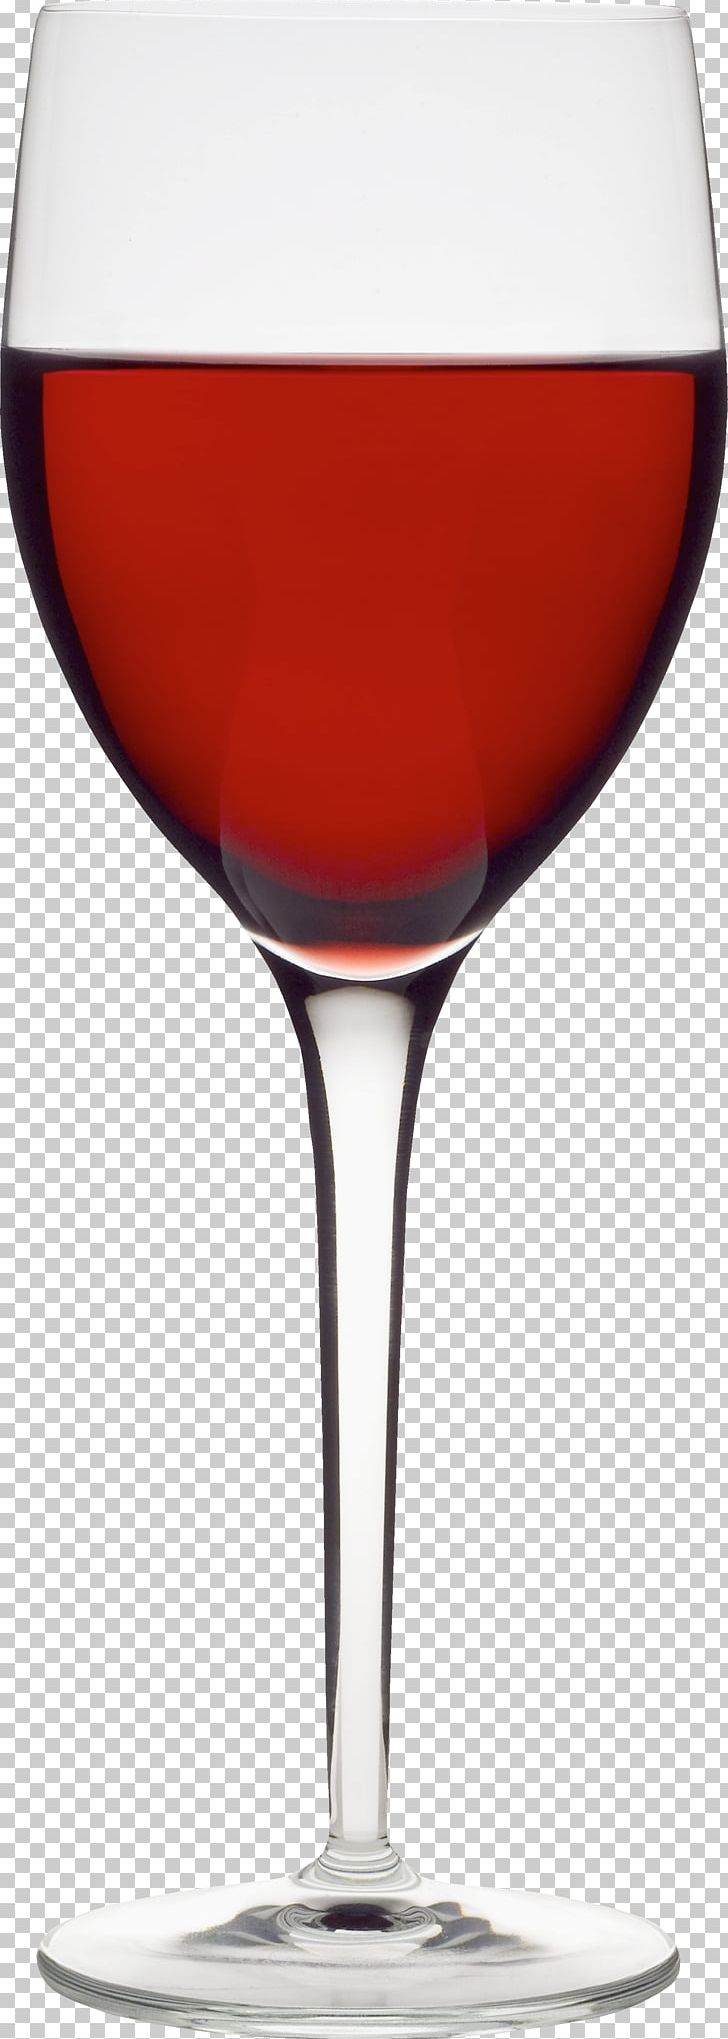 Red Wine Wine Glass Cocktail Champagne PNG, Clipart, Alcoholic Drink, Beer Glasses, Bottle, Champagne Glass, Champagne Stemware Free PNG Download